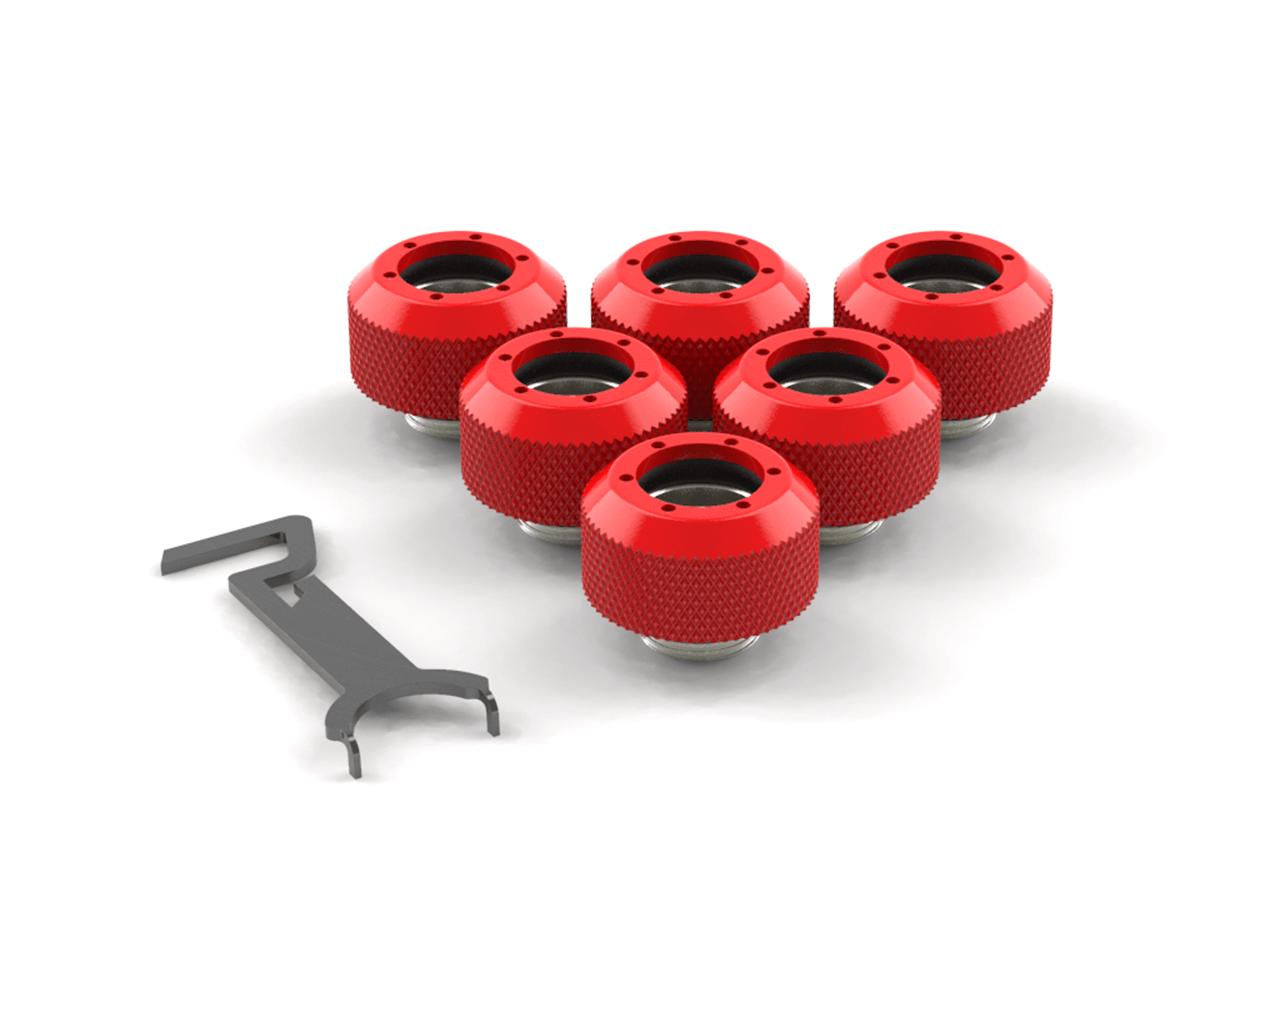 PrimoChill 1/2in. Rigid RevolverSX Series Fitting - 6 pack - PrimoChill - KEEPING IT COOL Comp Red